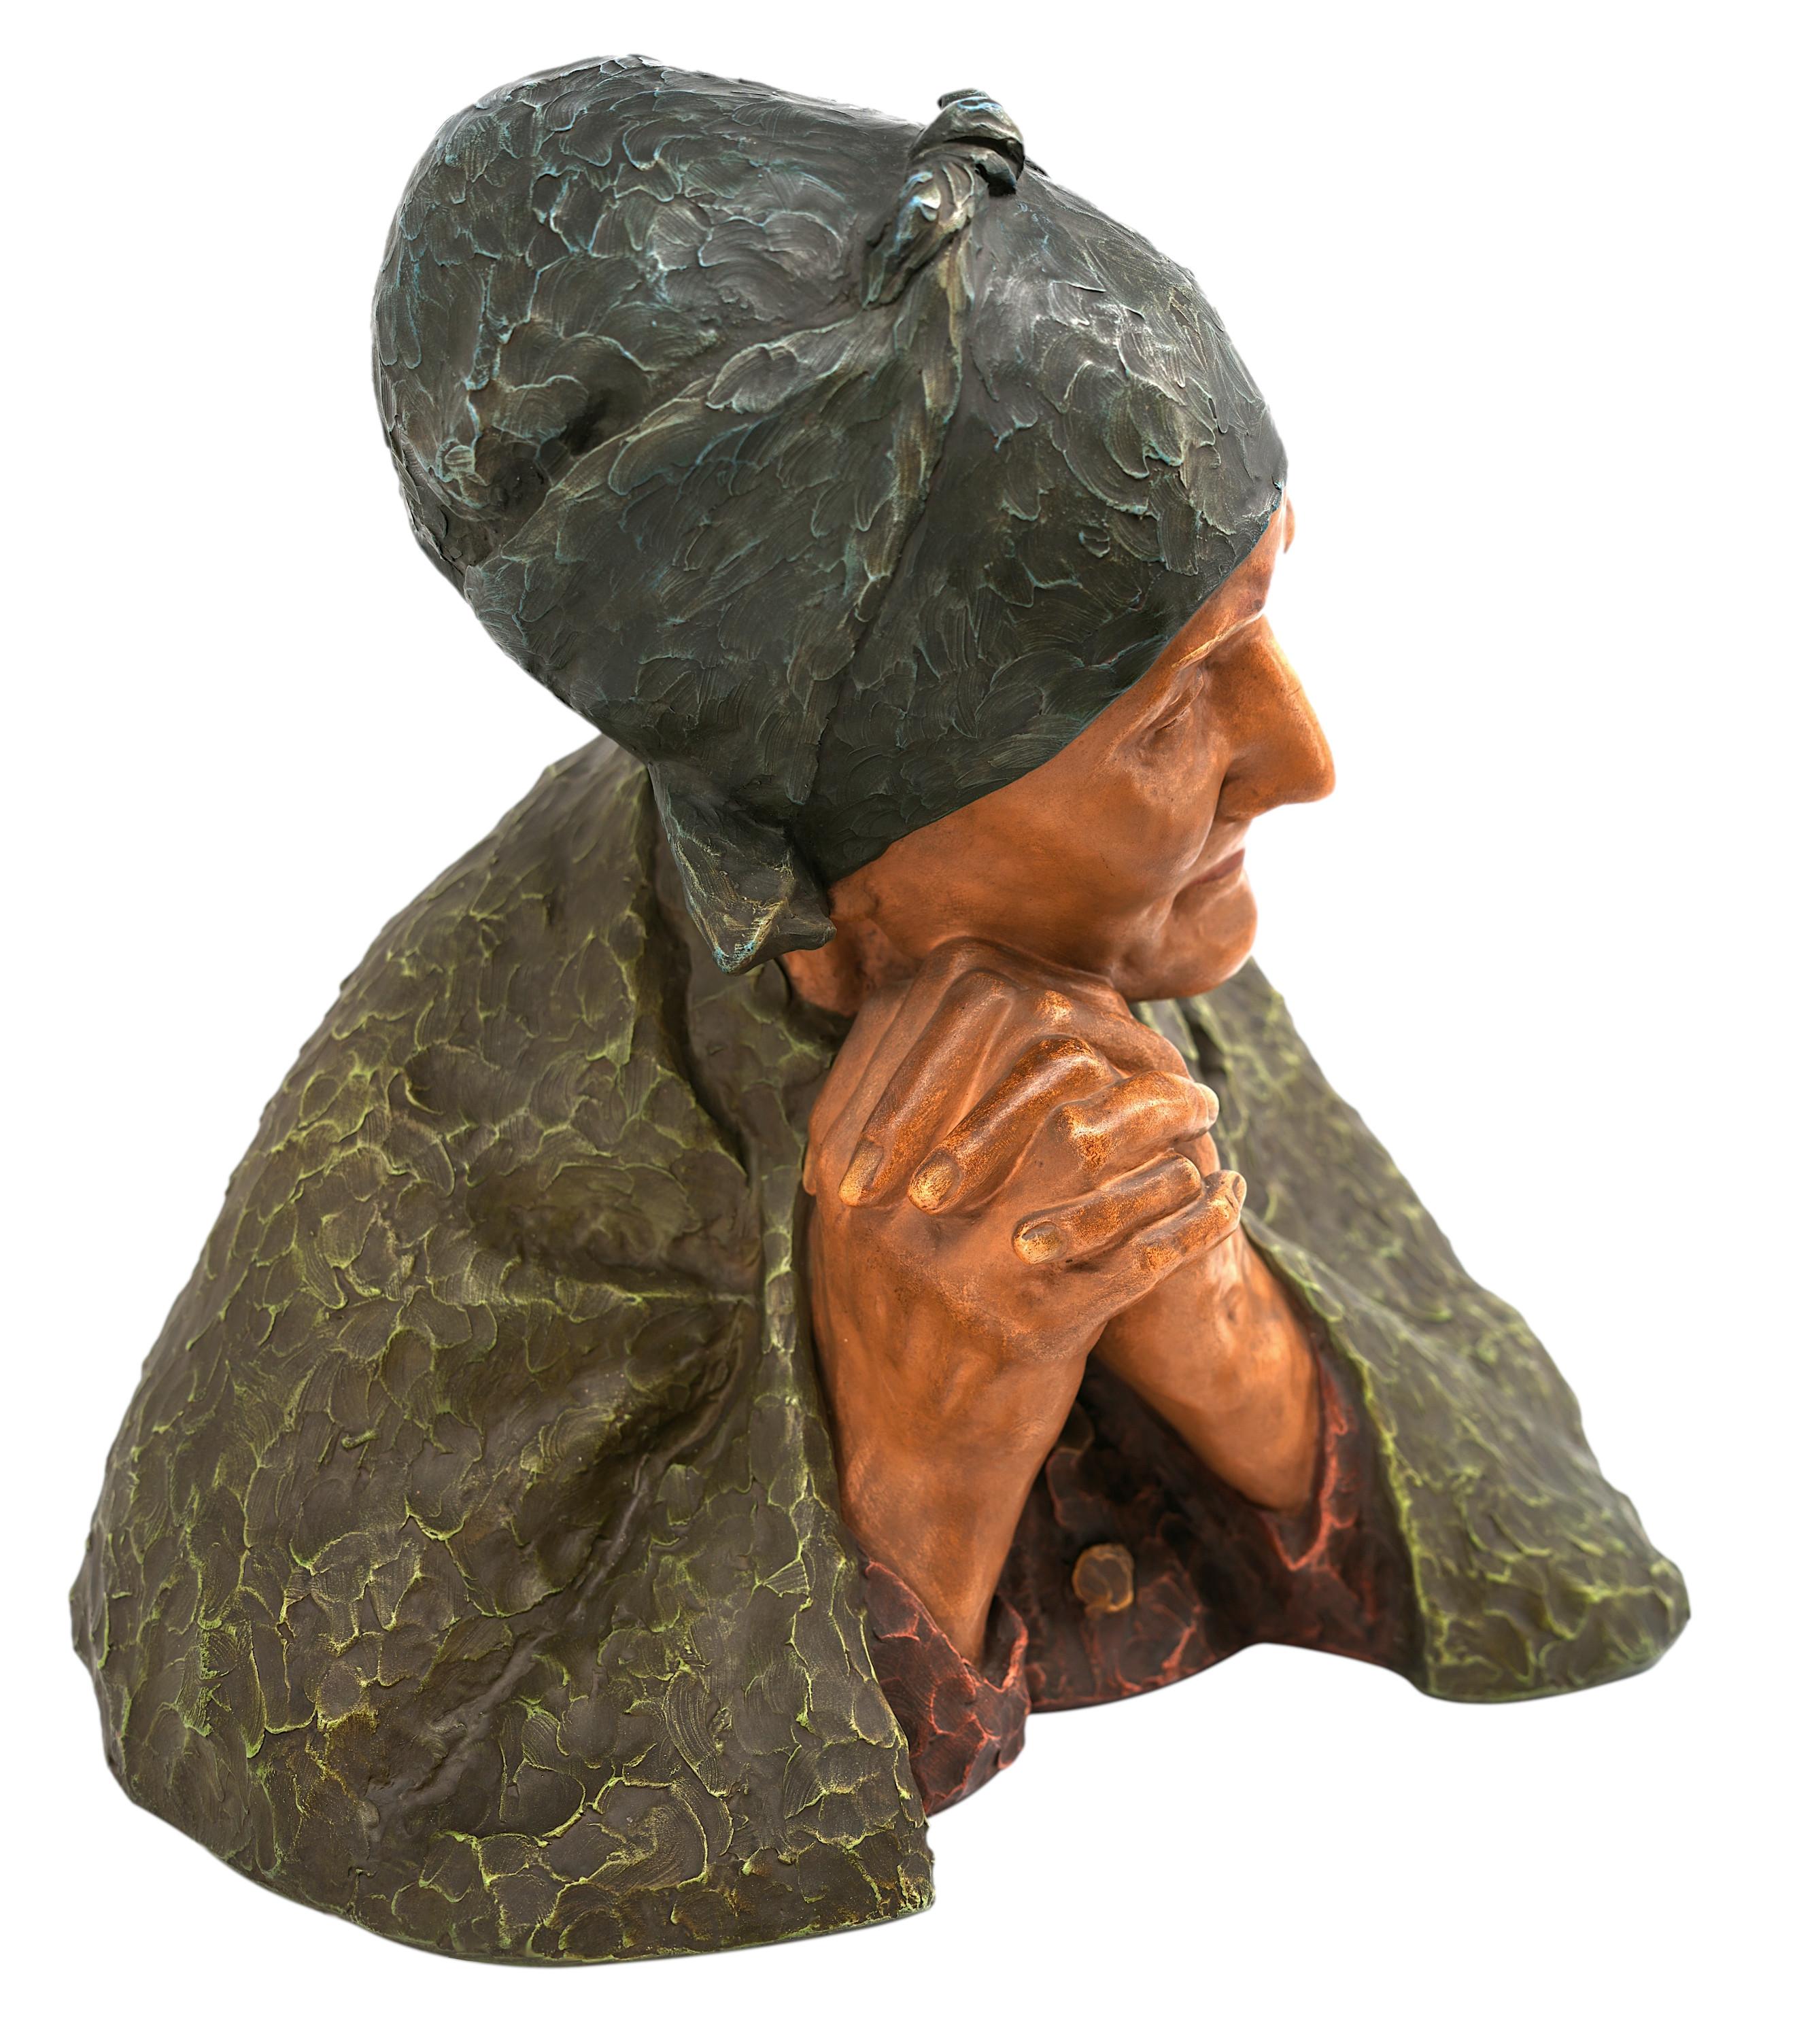 Polychromed Berthe GIRARDET Old Woman Old Woman Bust Sculpture, ca.1900 For Sale